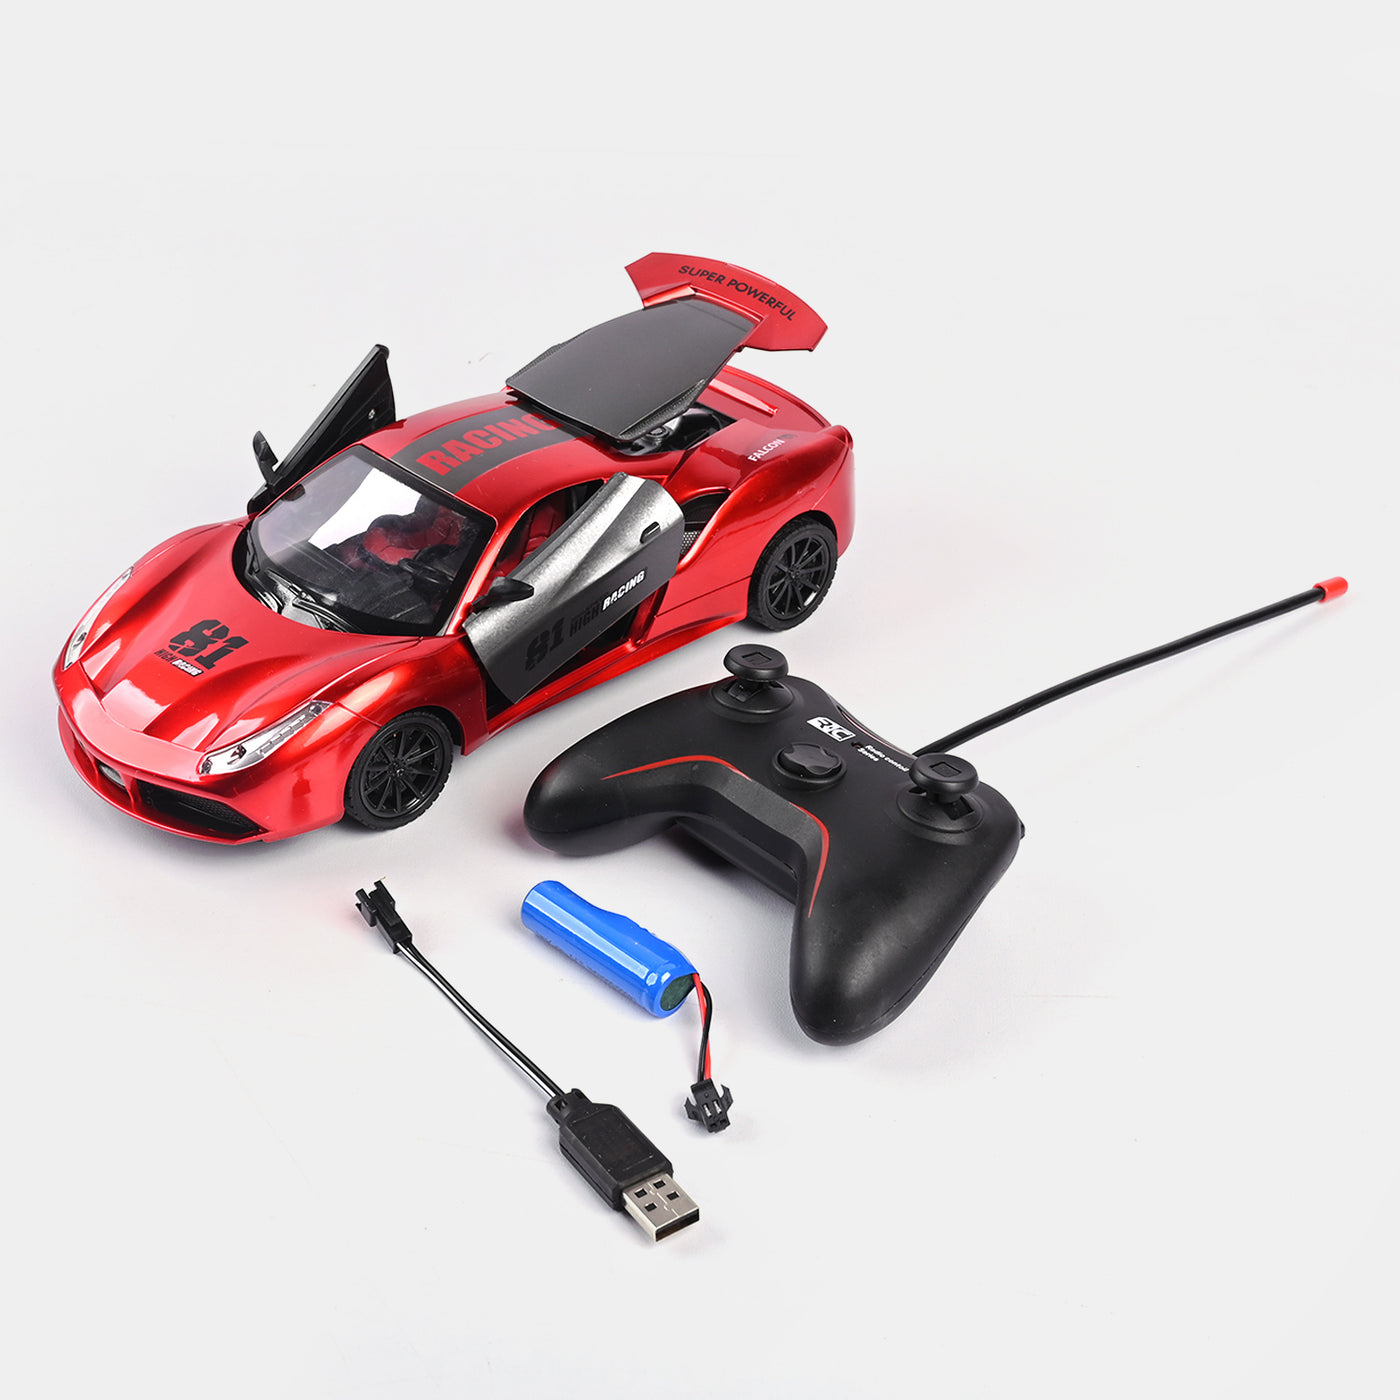 Remote Control Faster Rapid Drift Car With Light For Kids